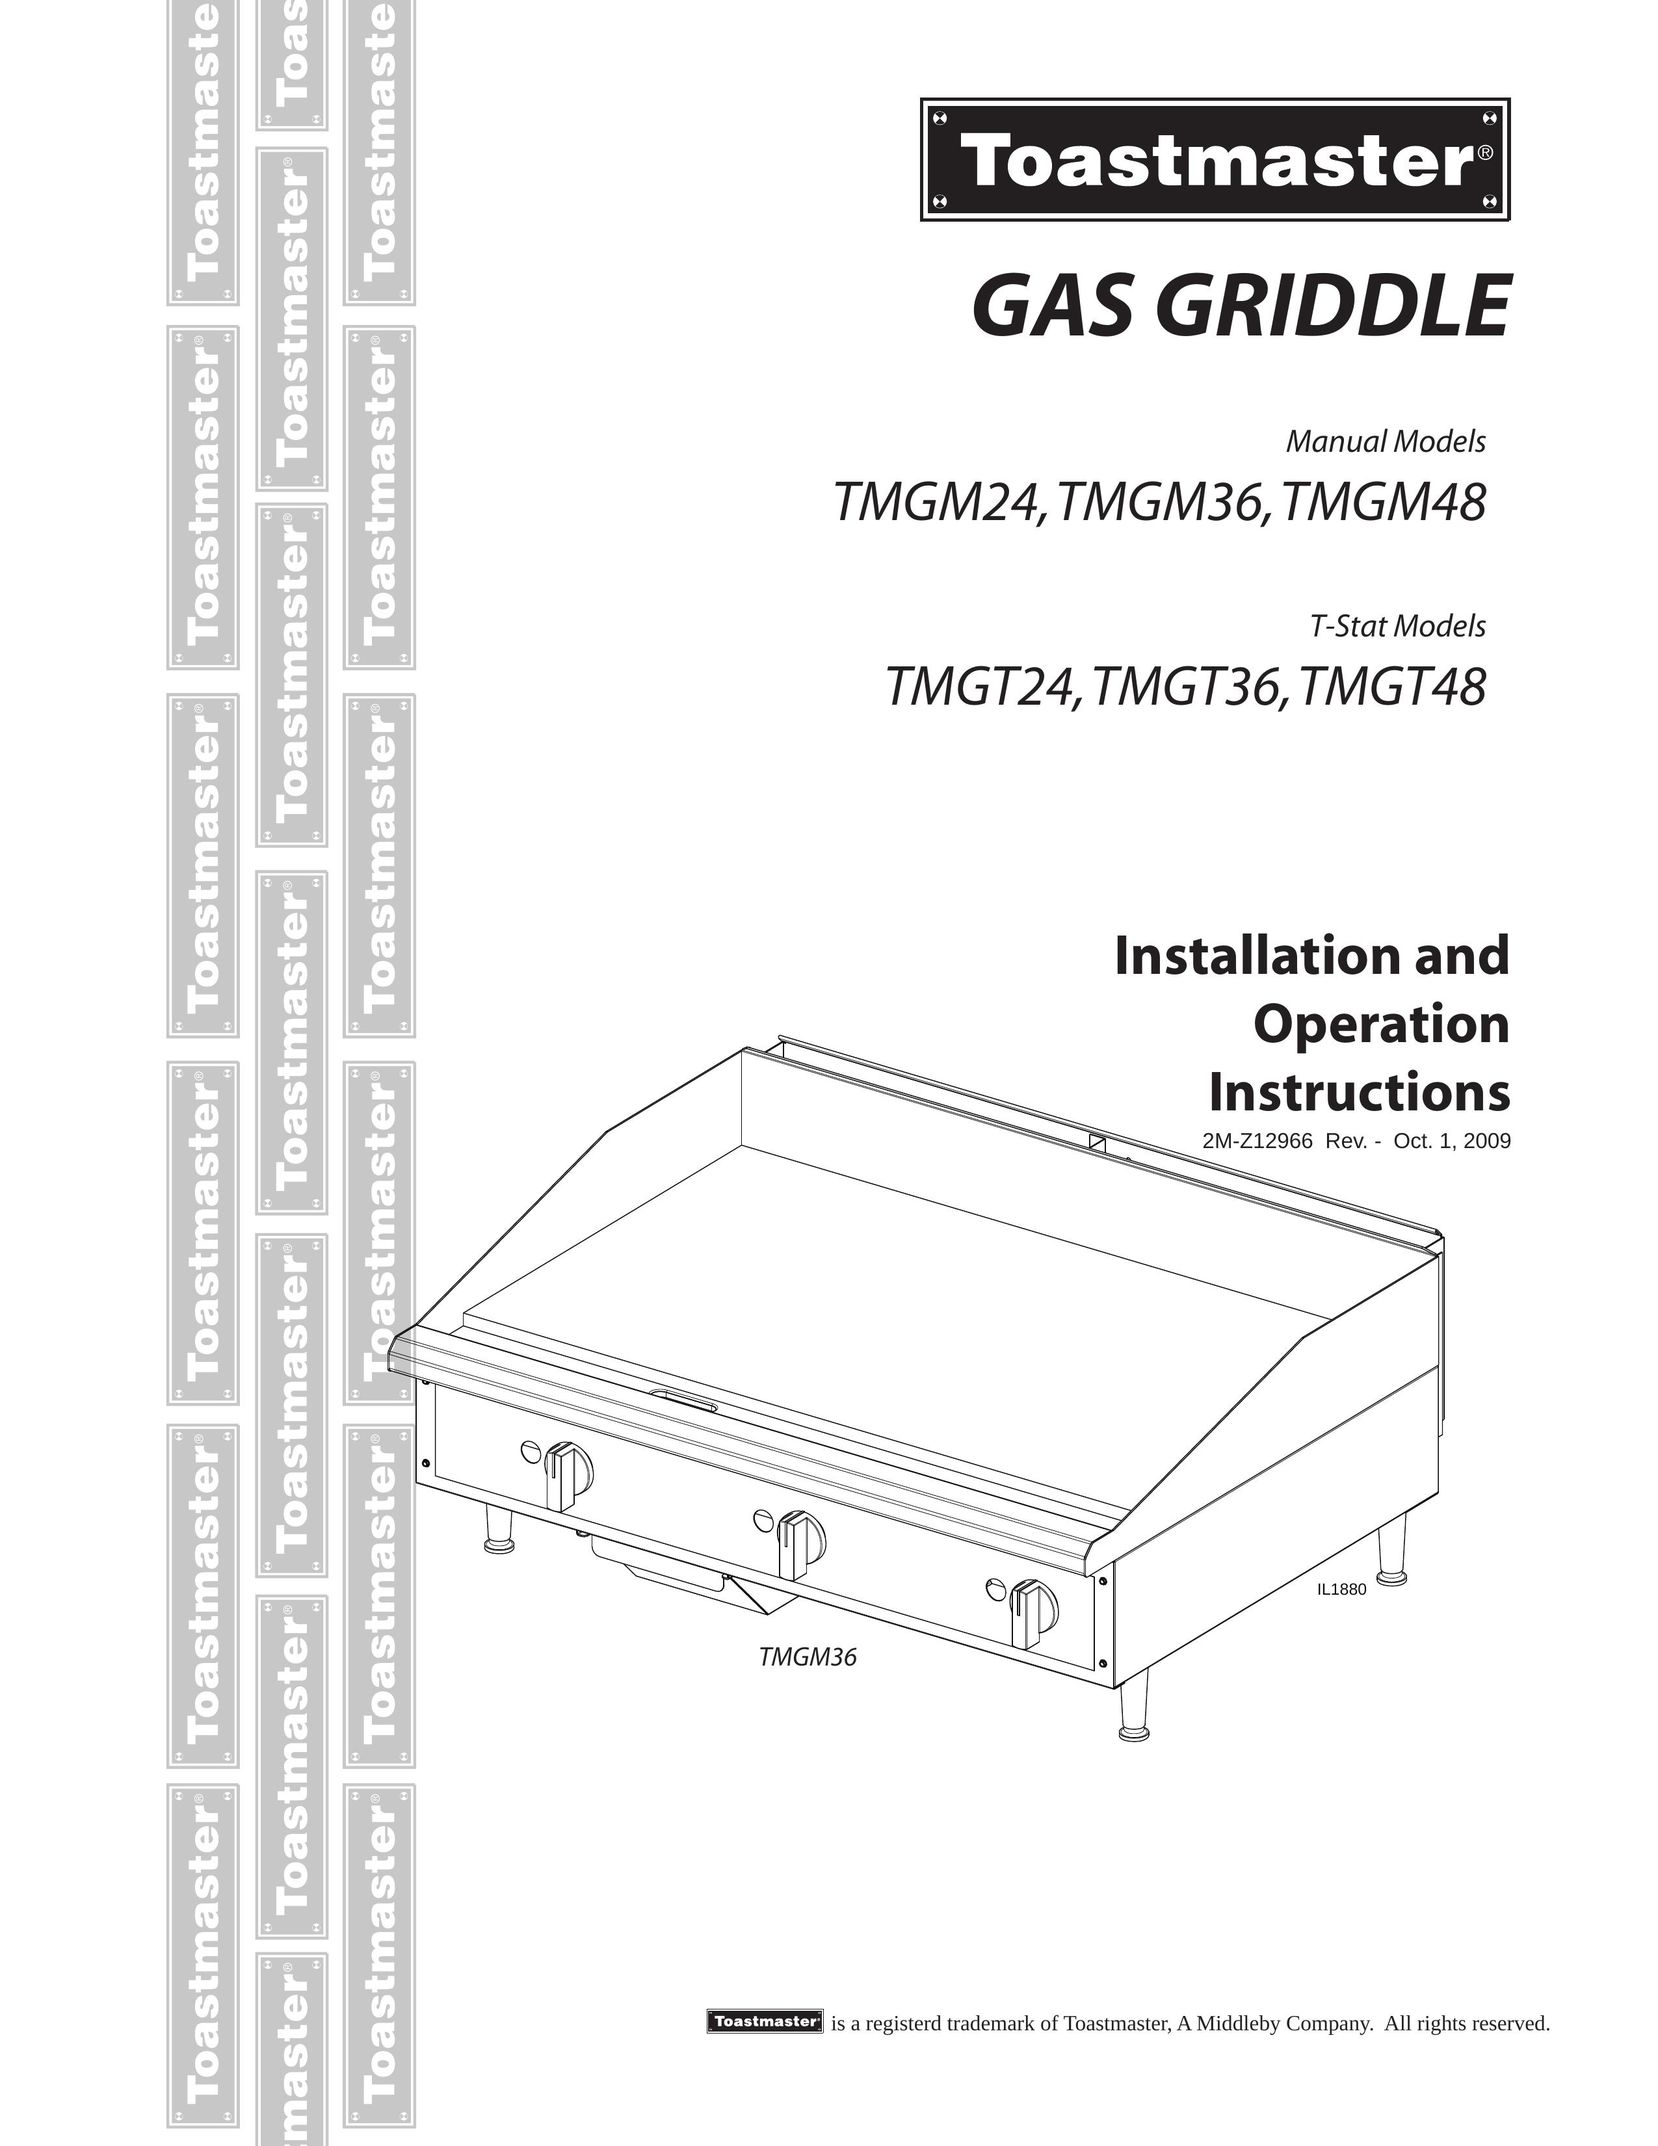 Toastmaster TMGM48 Griddle User Manual